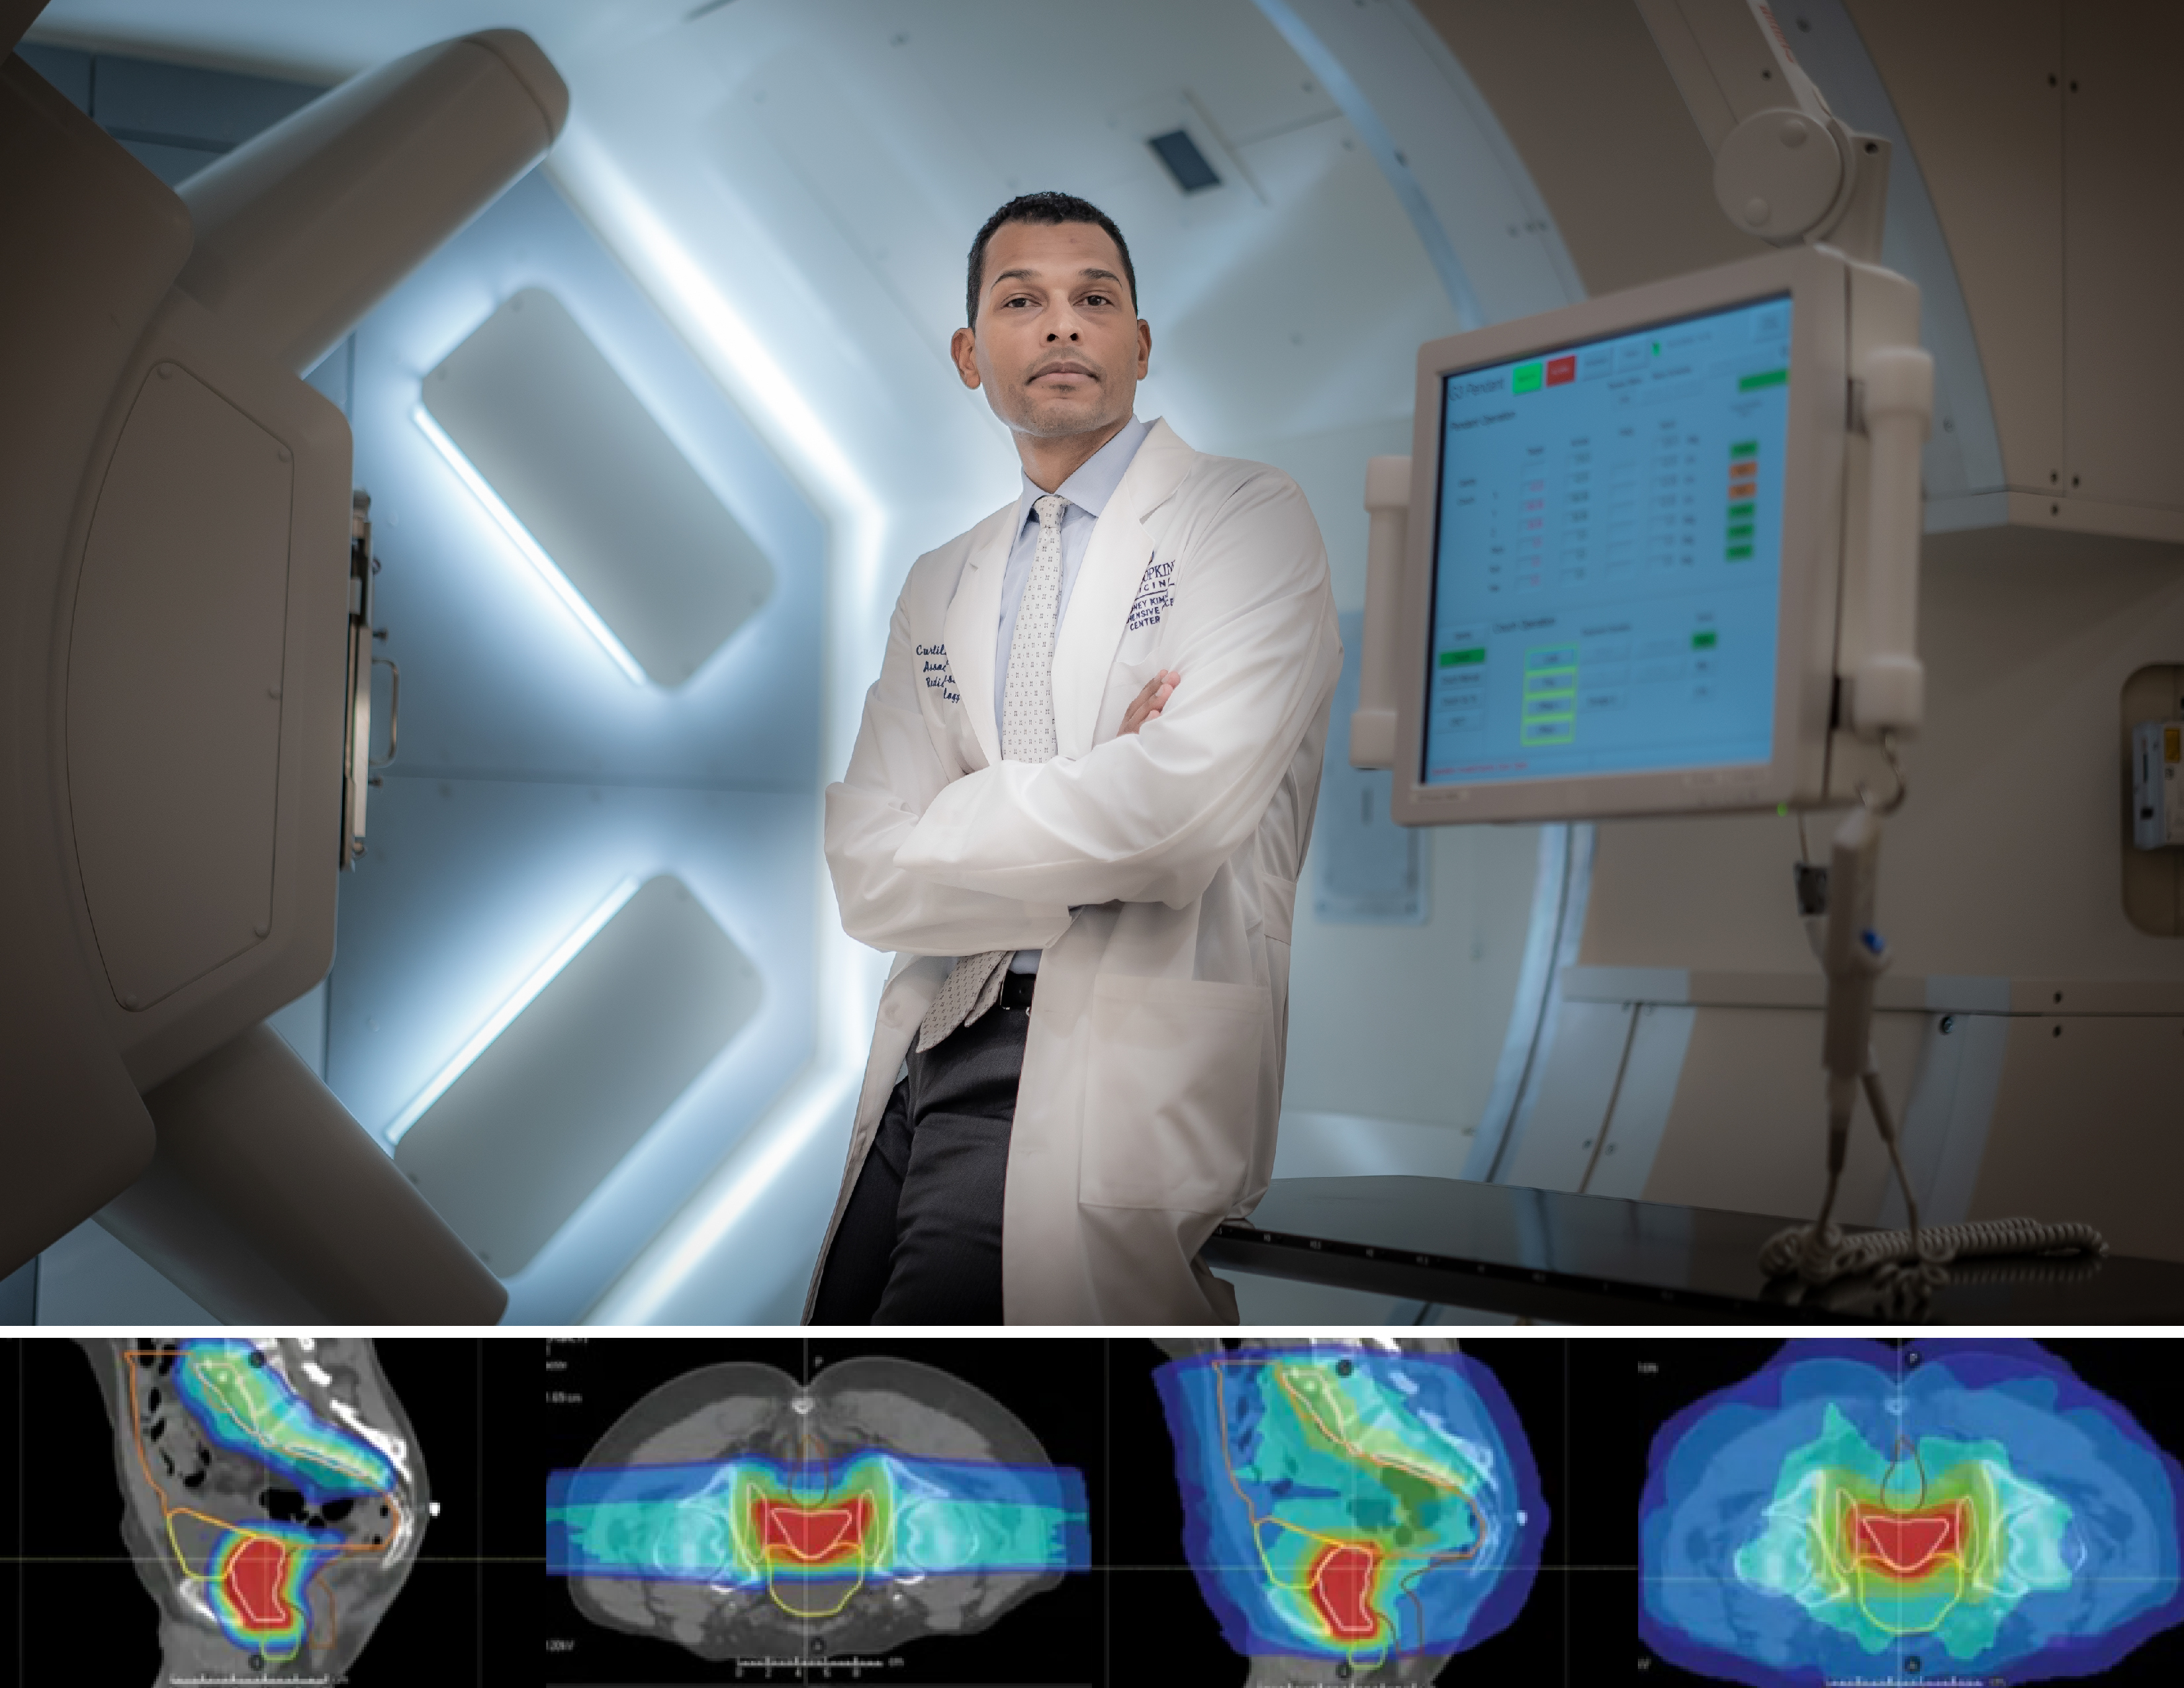 Curtiland Deville, wearing a white lab coat, light blue button down shirt and white dotted tie, poses in front of the proton machine. Below him are The example shows how a patient’s bowel, bladder and rectum are spared of radiation in proton therapy versus photon radiation therapy.